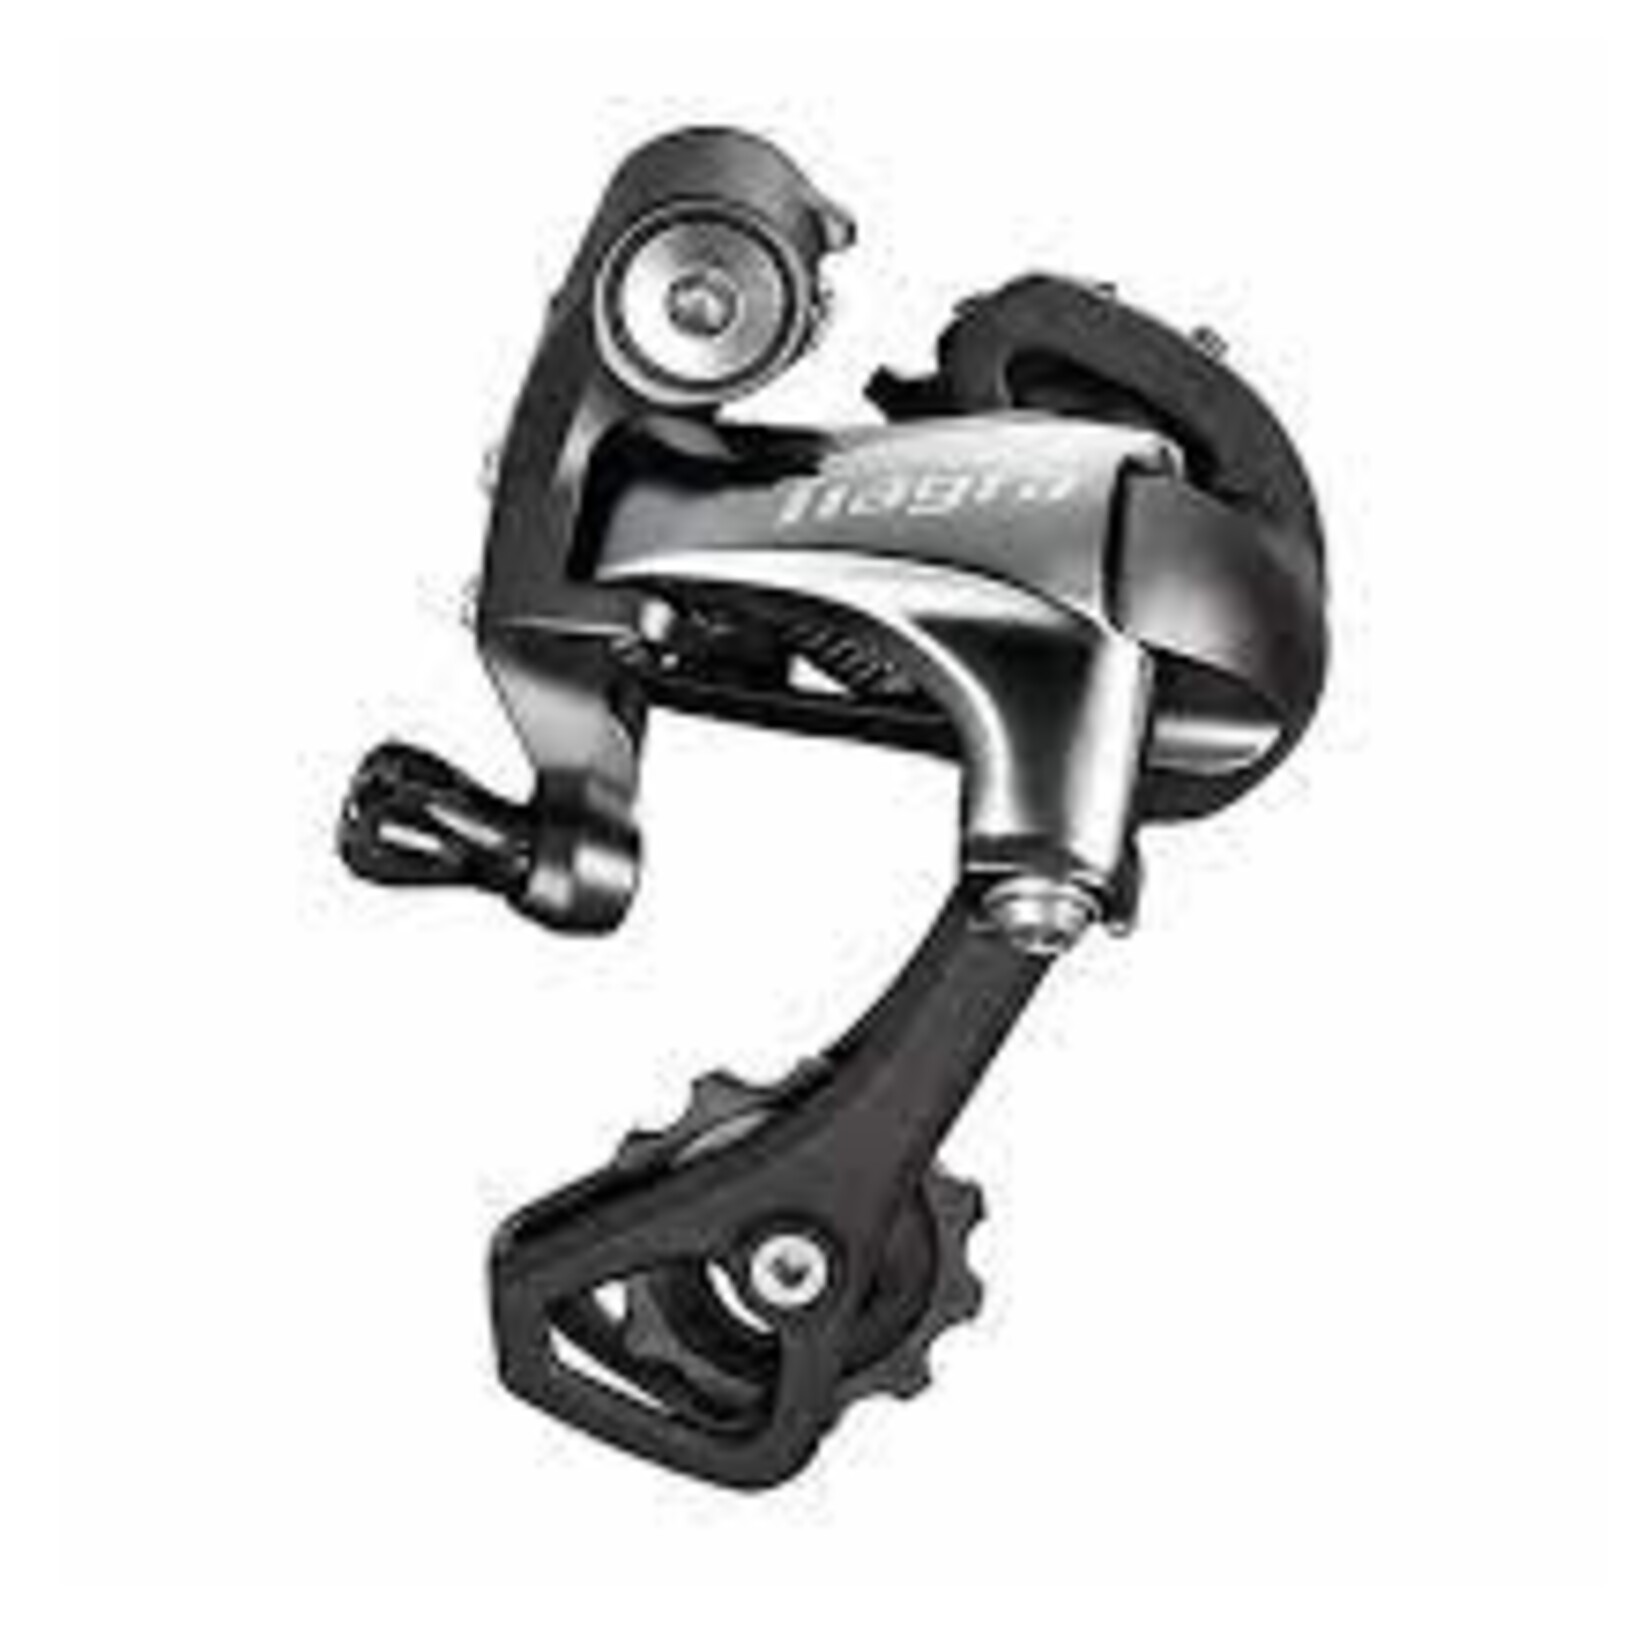 Shimano REAR DERAILLEUR, RD-4700, TIAGRA, GS 10-SPEED DIRECT ATTACHMENT, COMPATIBLE WITH LOW GEAR 28-34T FOR DOUBLE, 25-32T FOR TRIPLE